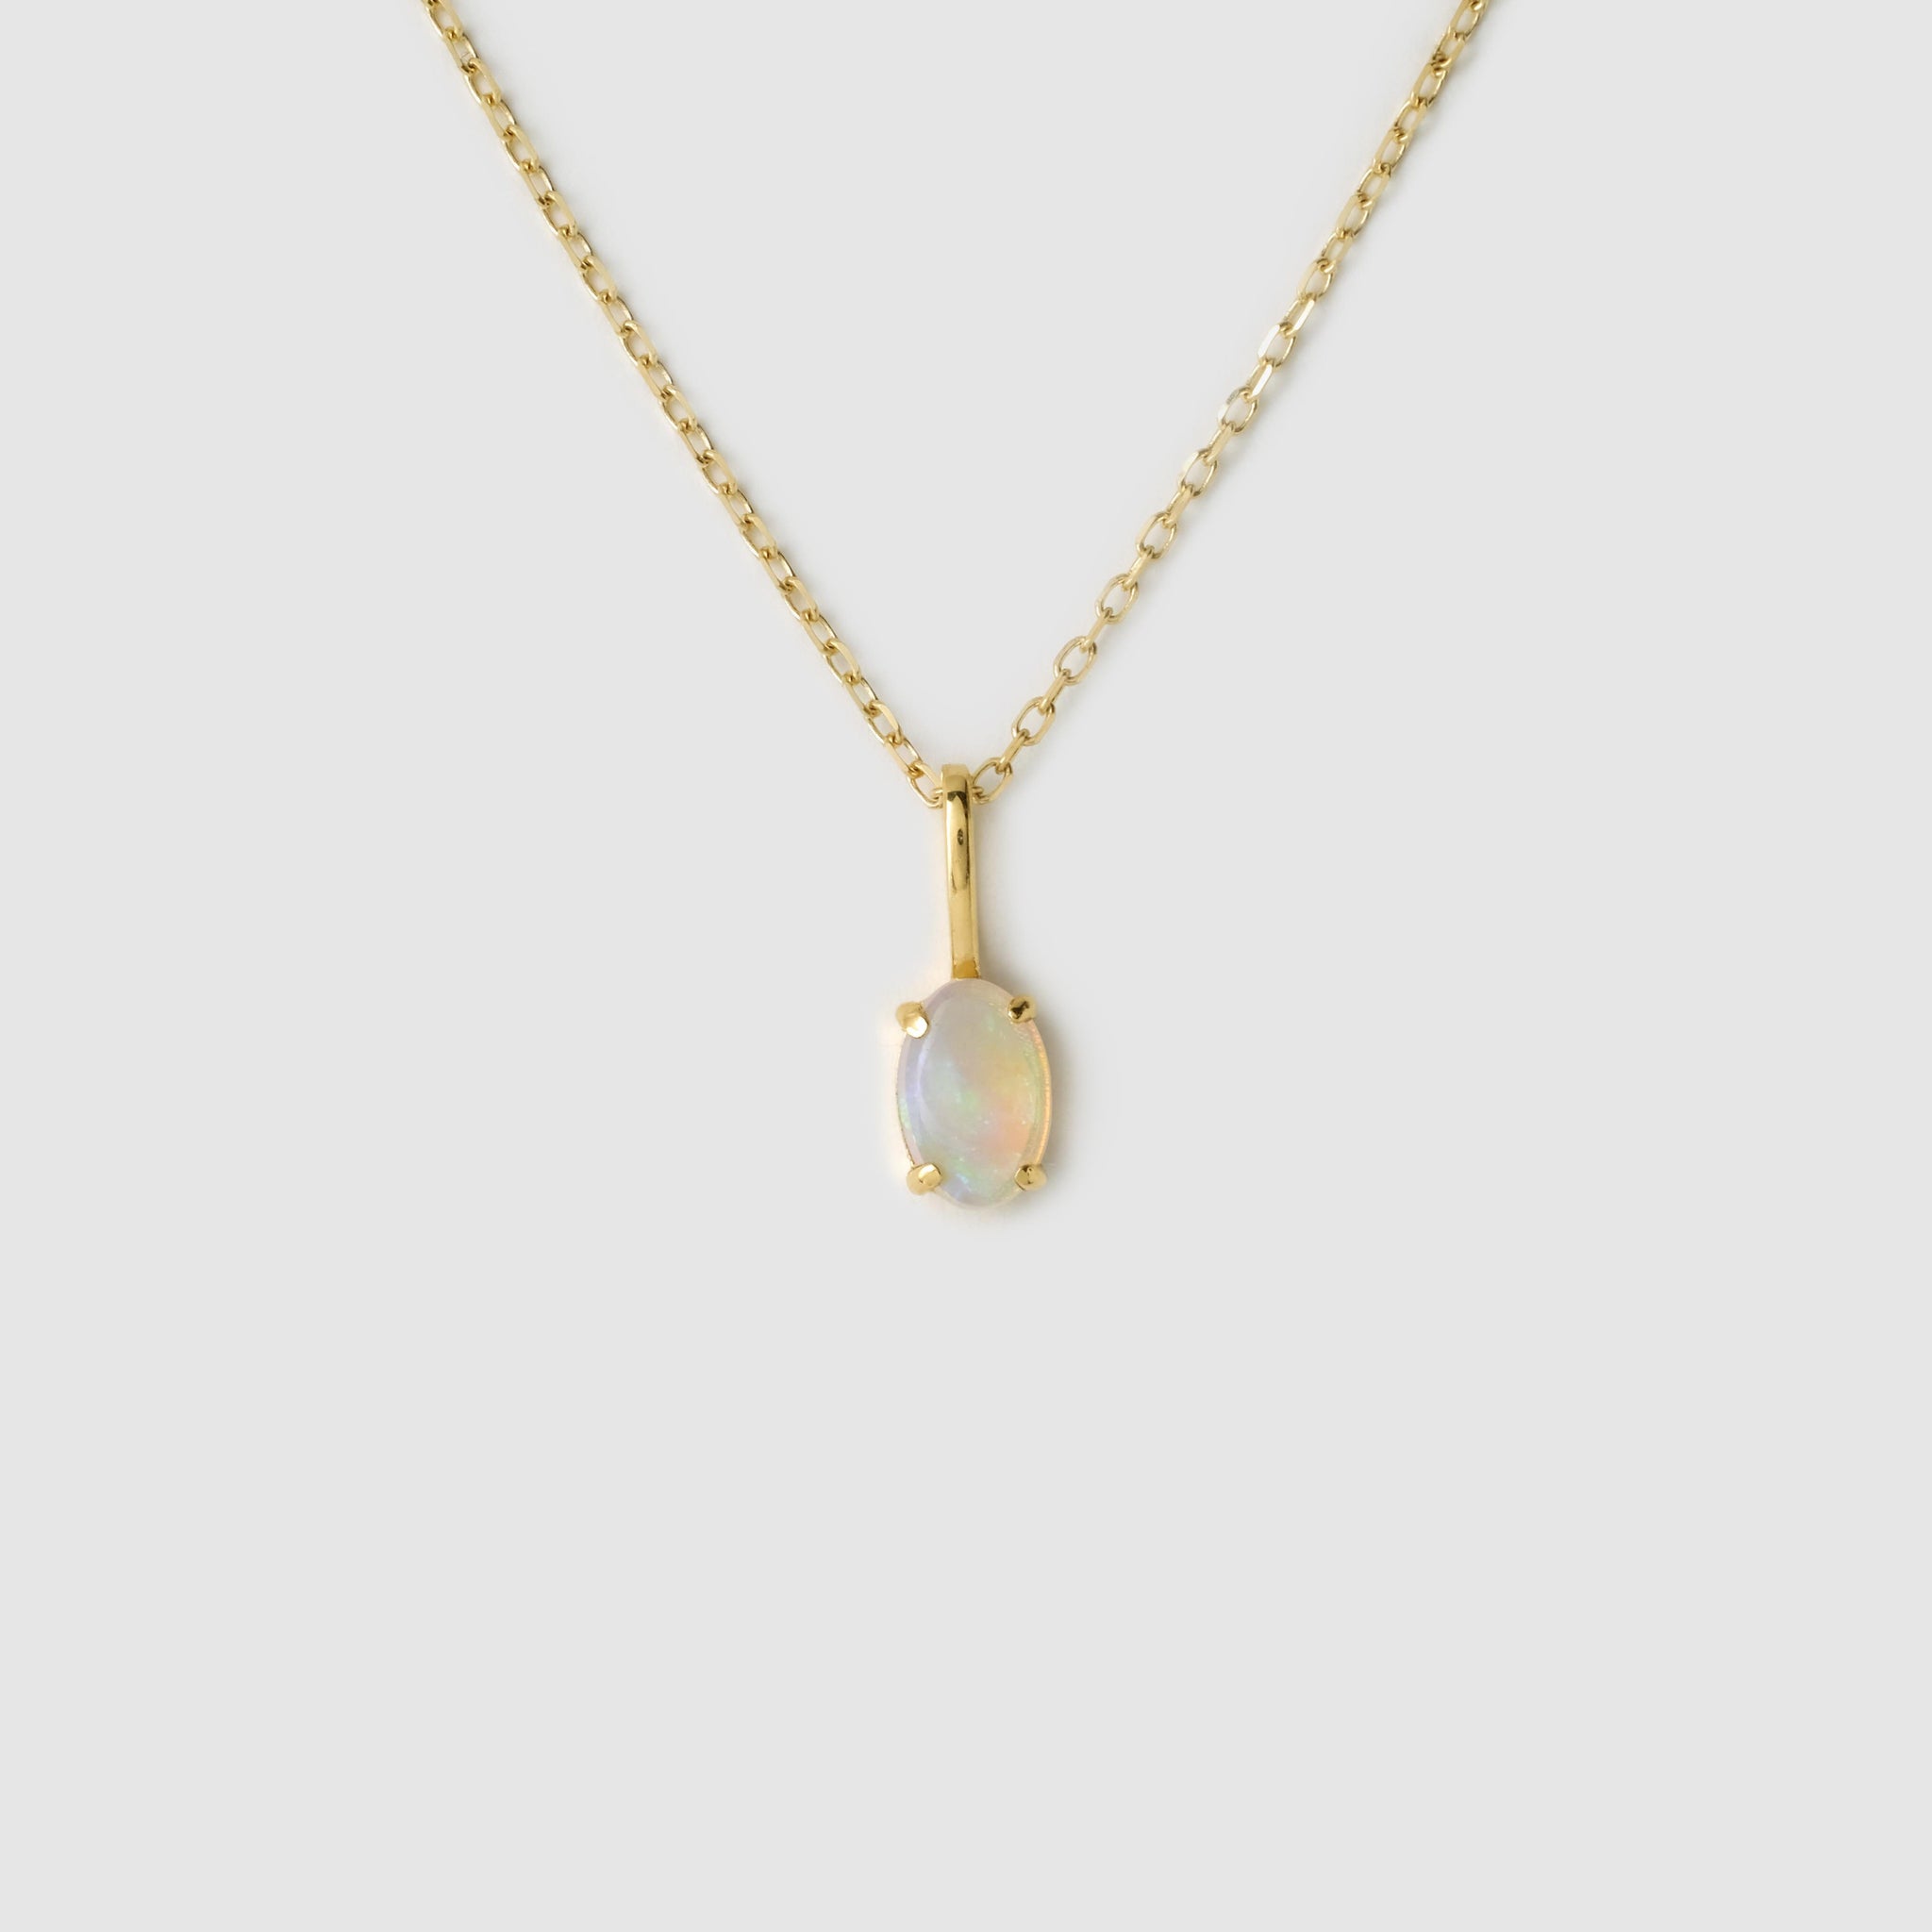 Oval Opal Necklace / Pendant, 18k solid gold